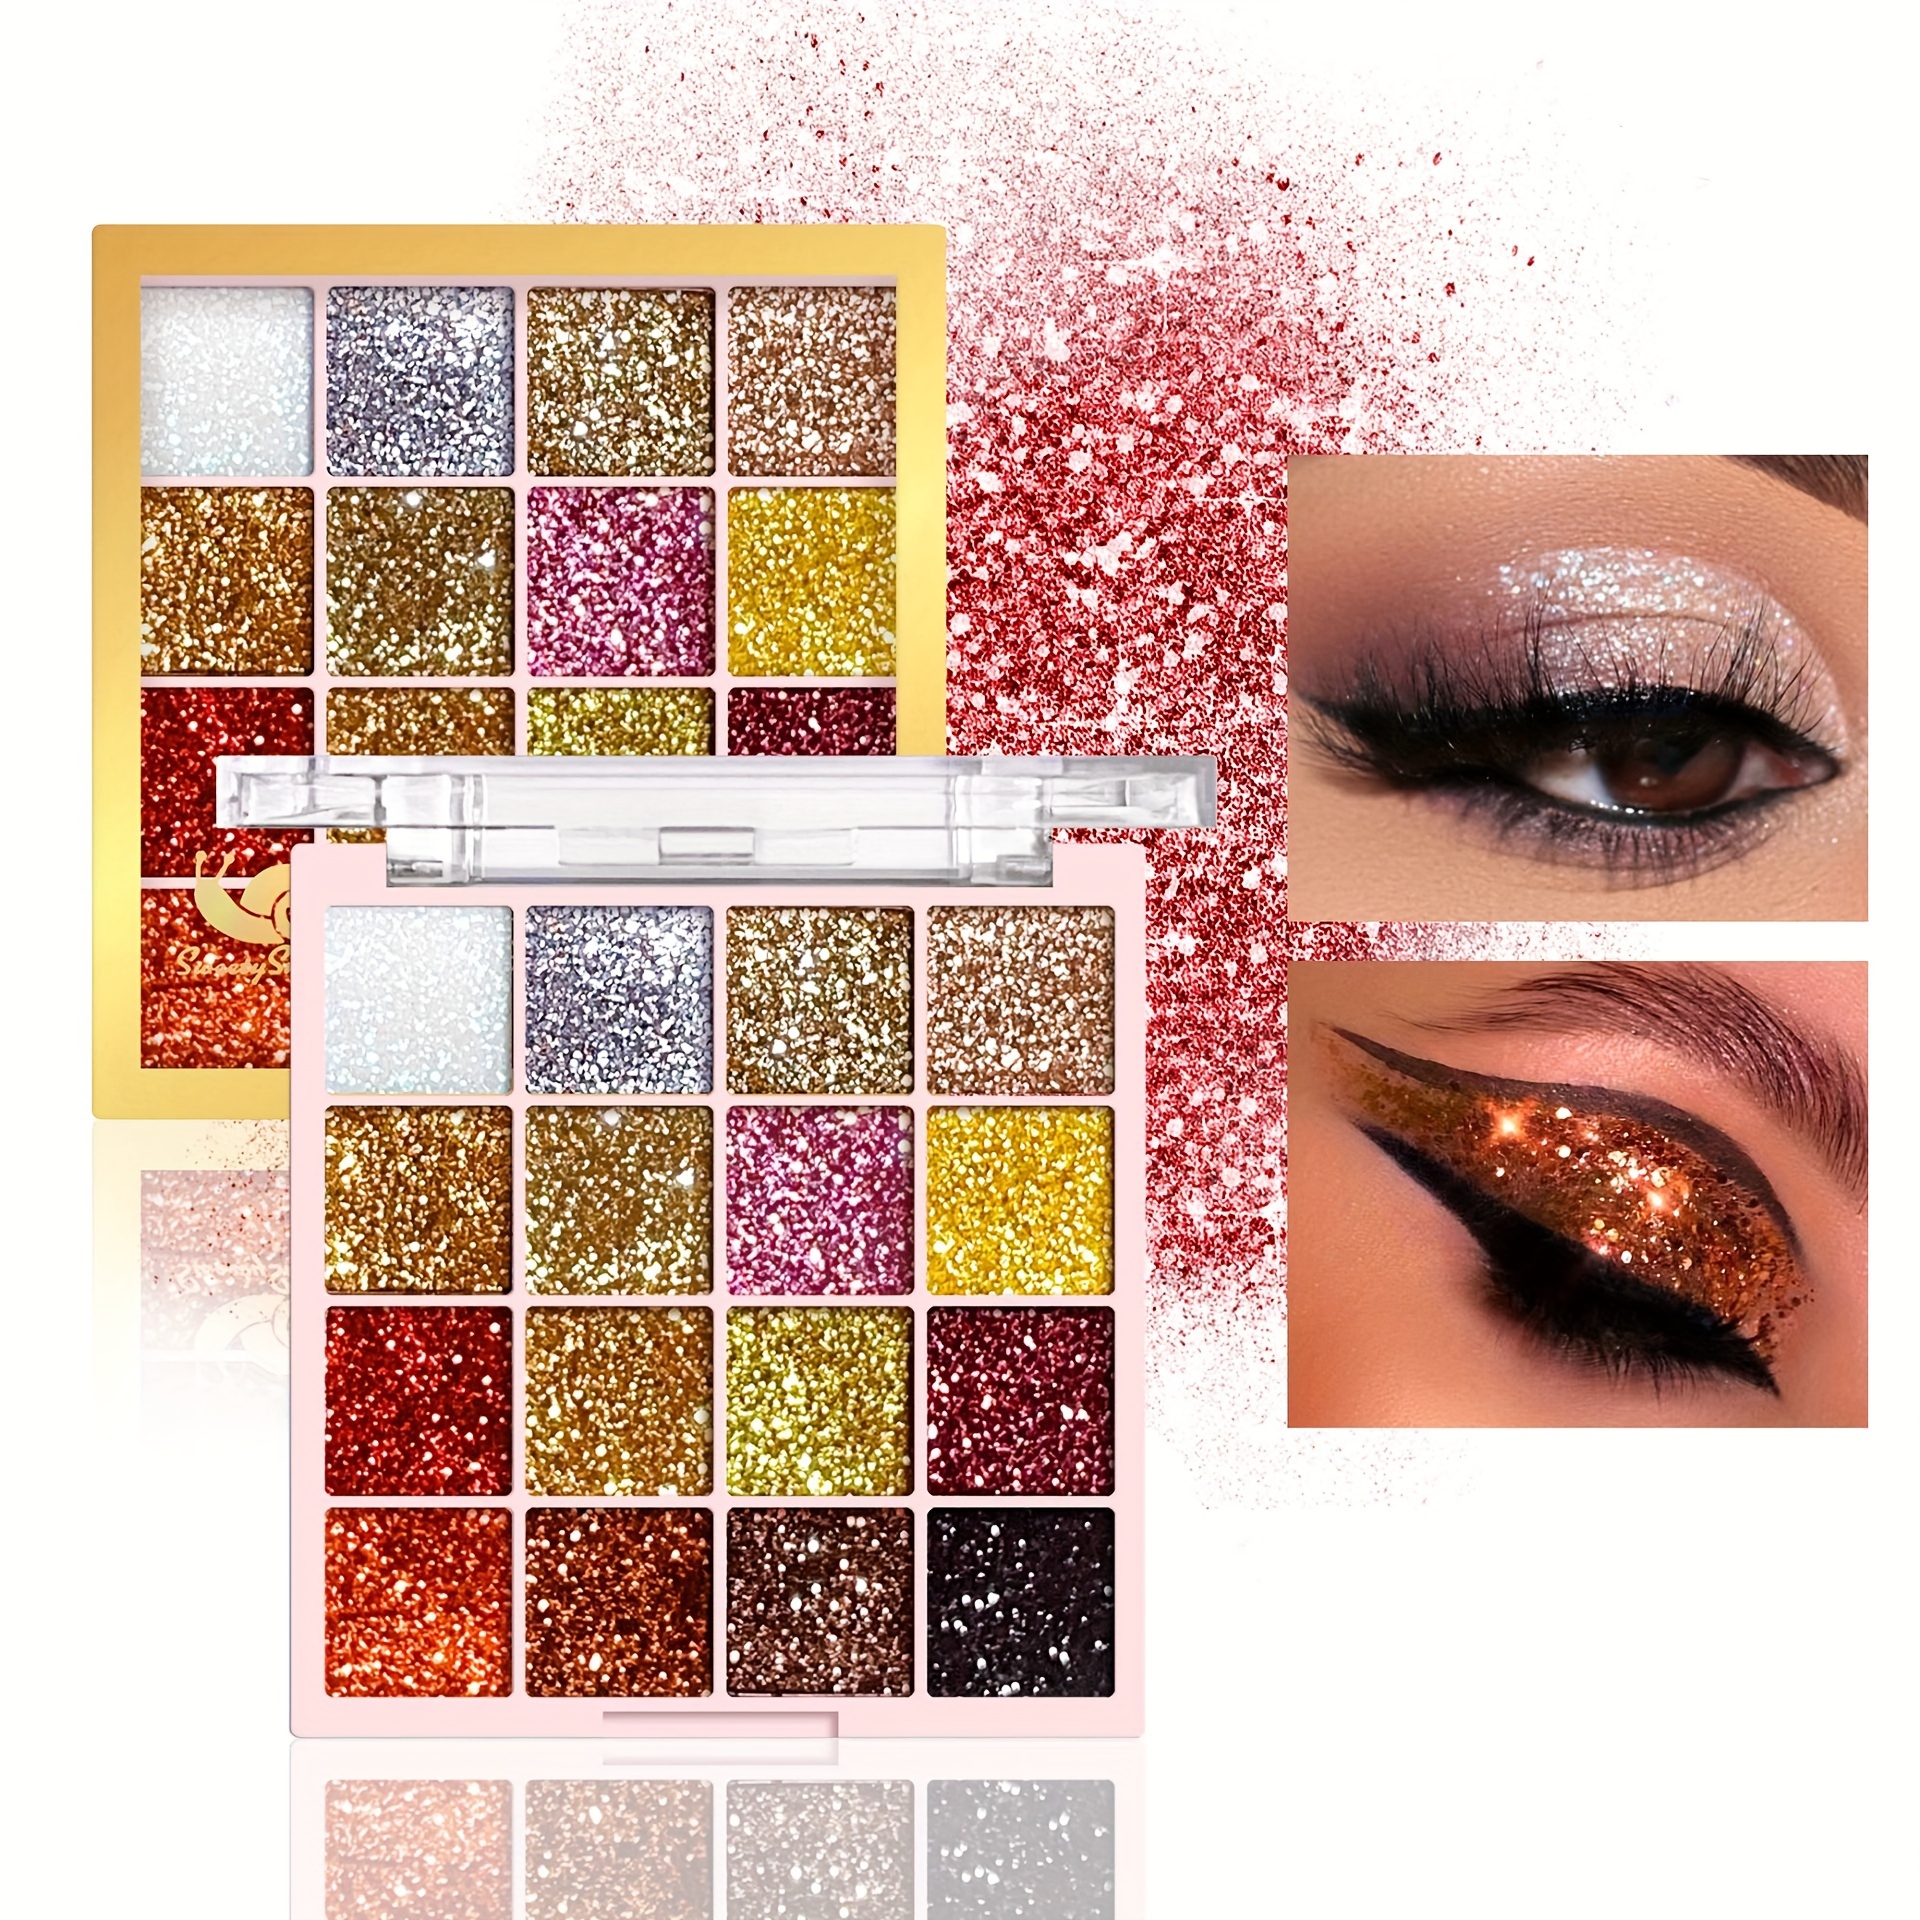 

16-color Sequin Glitter Eyeshadow Palette, Bright & Shiny Makeup For Stage And Fashion, High Pigmentation, Multi-use For Eye, Lip & Hair Decoration, Sparkling Metallic Shades, Golden Brown Tones